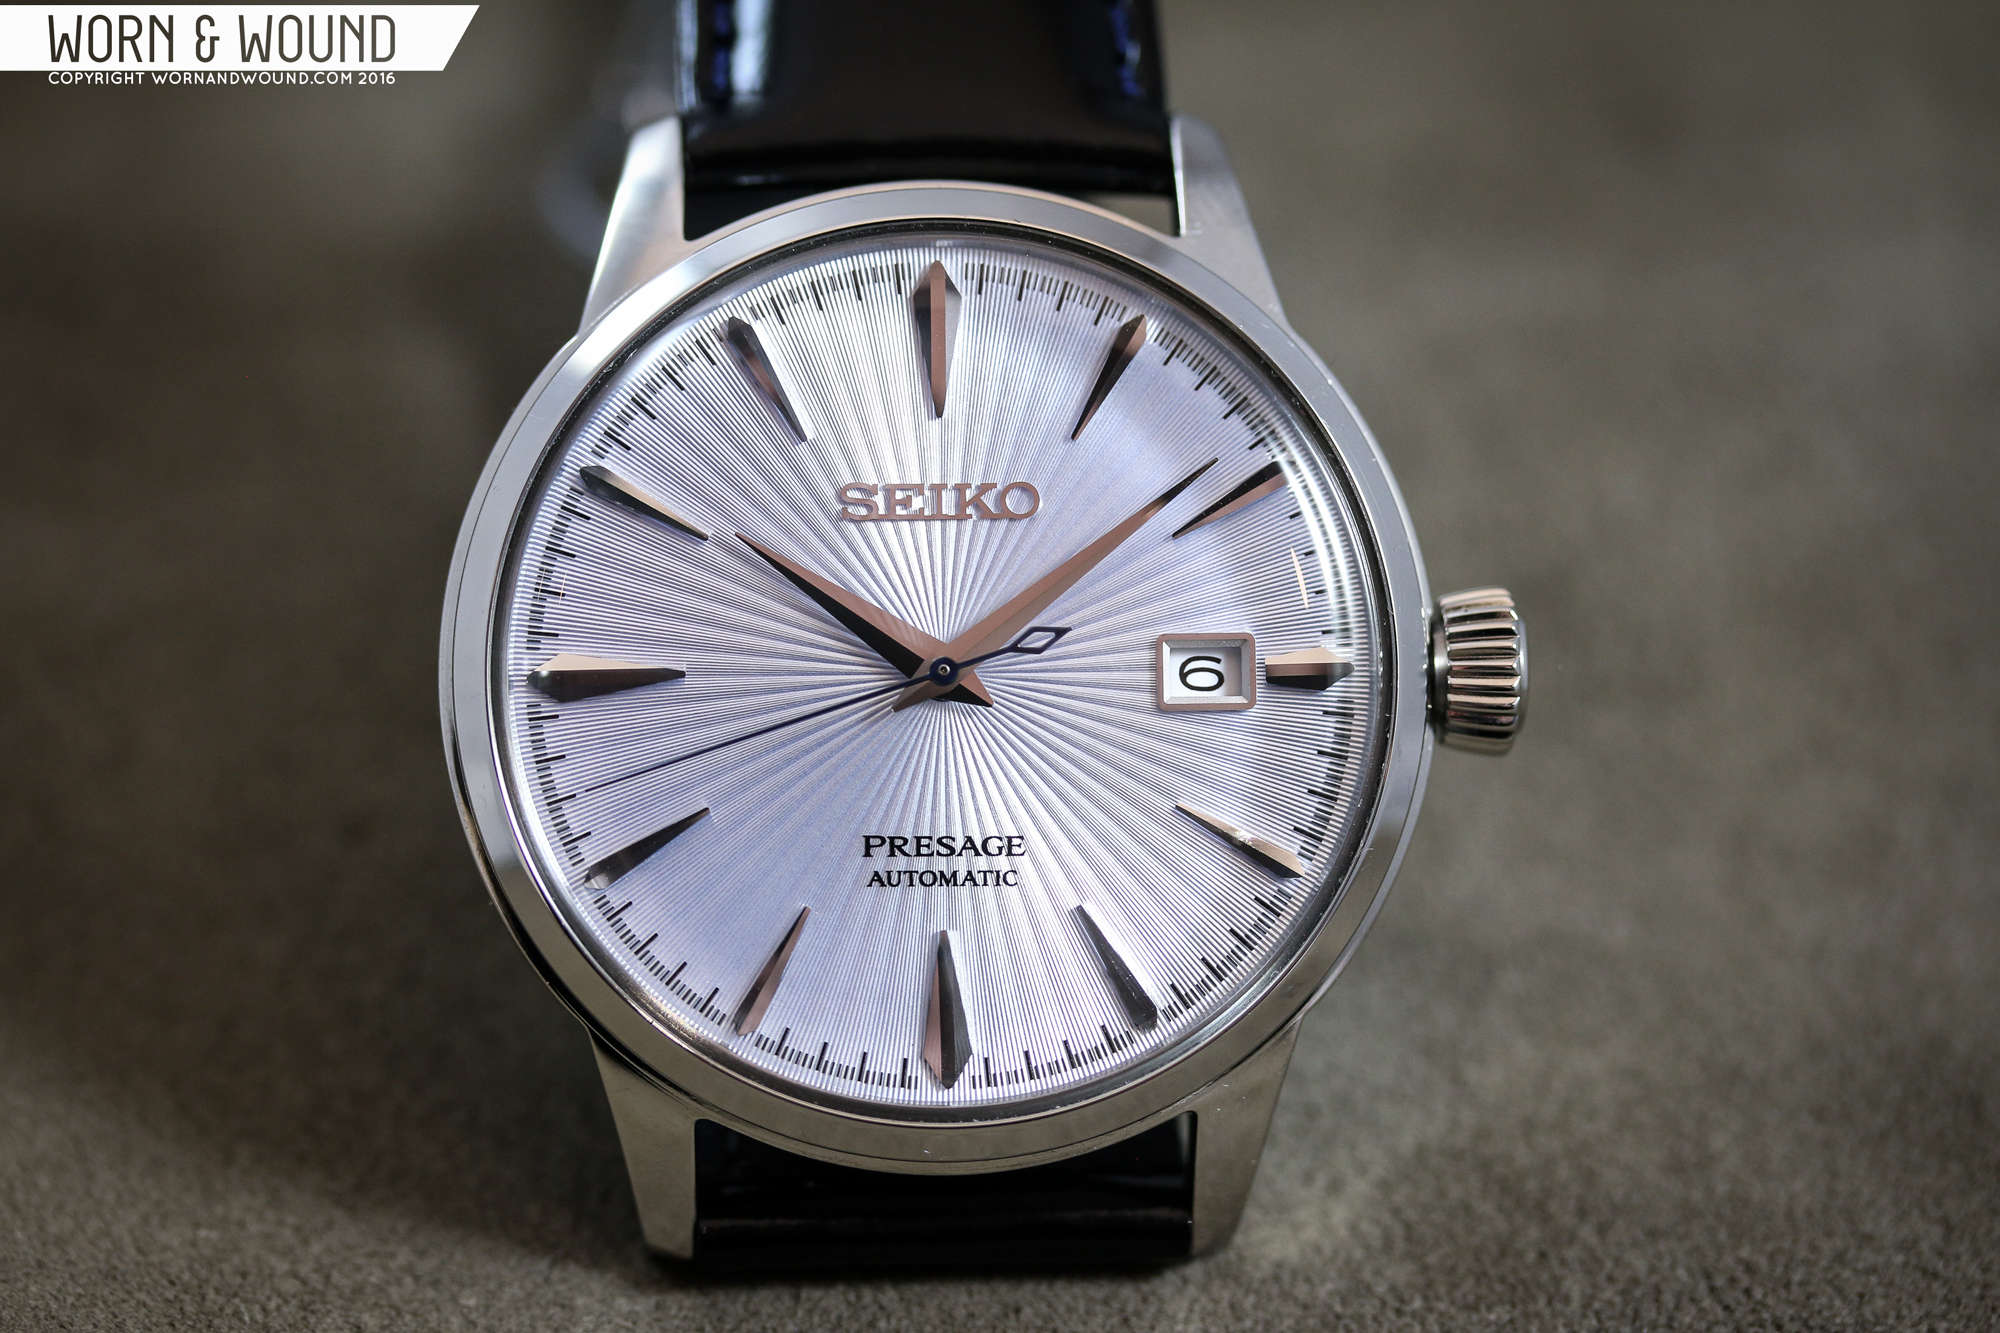 Bliv oppe Bedøvelsesmiddel forligsmanden Seiko Brings the “Cocktail Time” to Presage and Expands the Line With New  Models and Colors - Worn & Wound